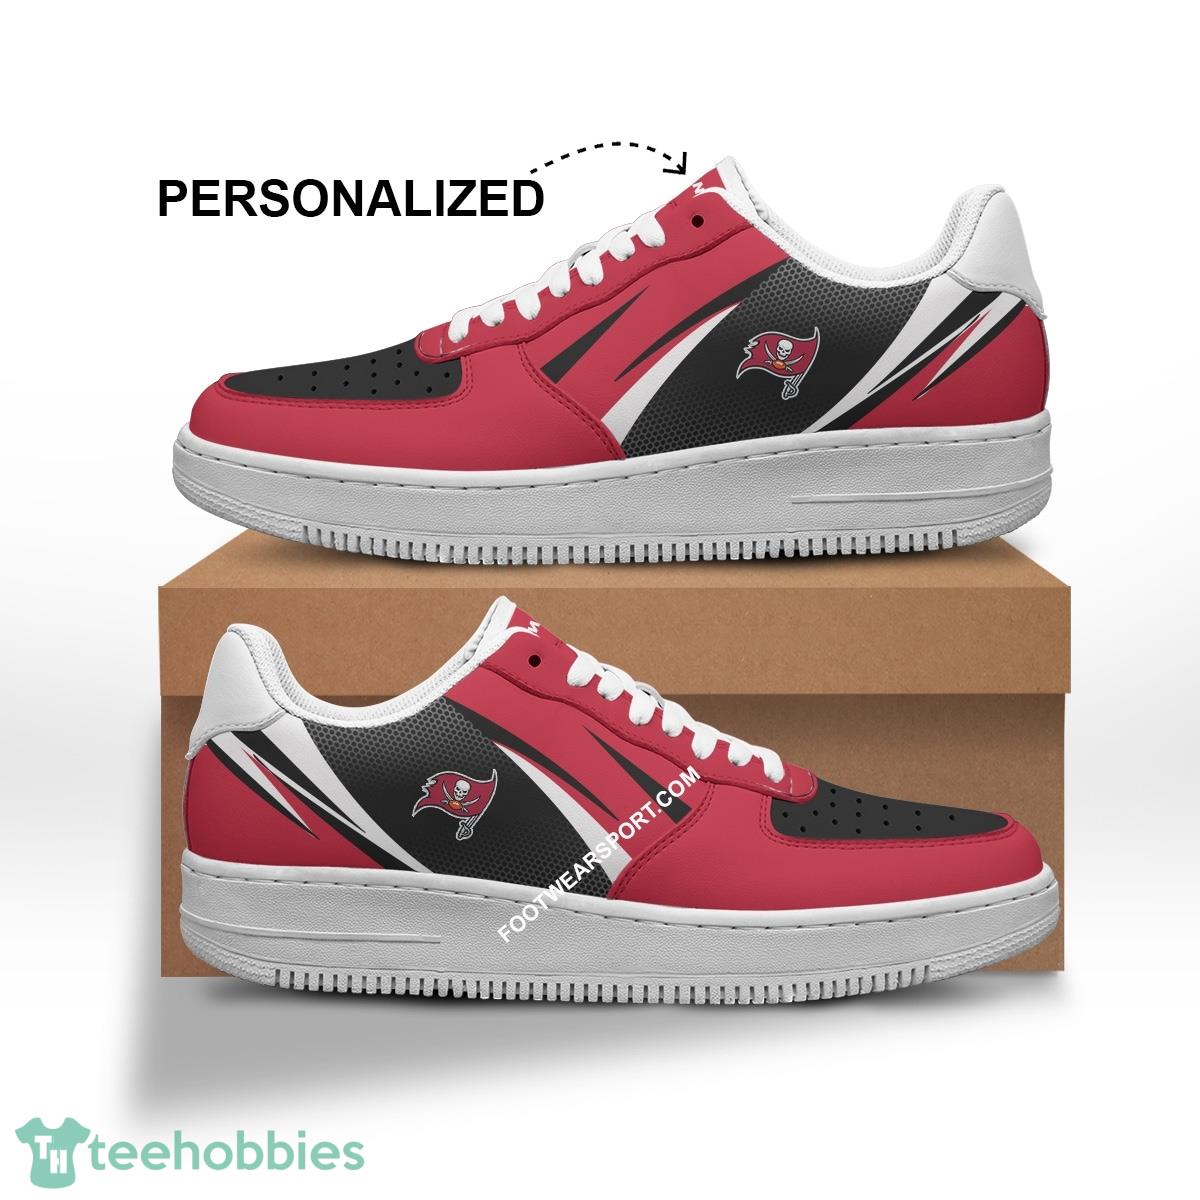 Custom Name Tampa Bay Buccaneers Air Force 1 Shoes Trending Design For Big Fans - NFL Tampa Bay Buccaneers Air Force 1 Shoes Personalized Style 1